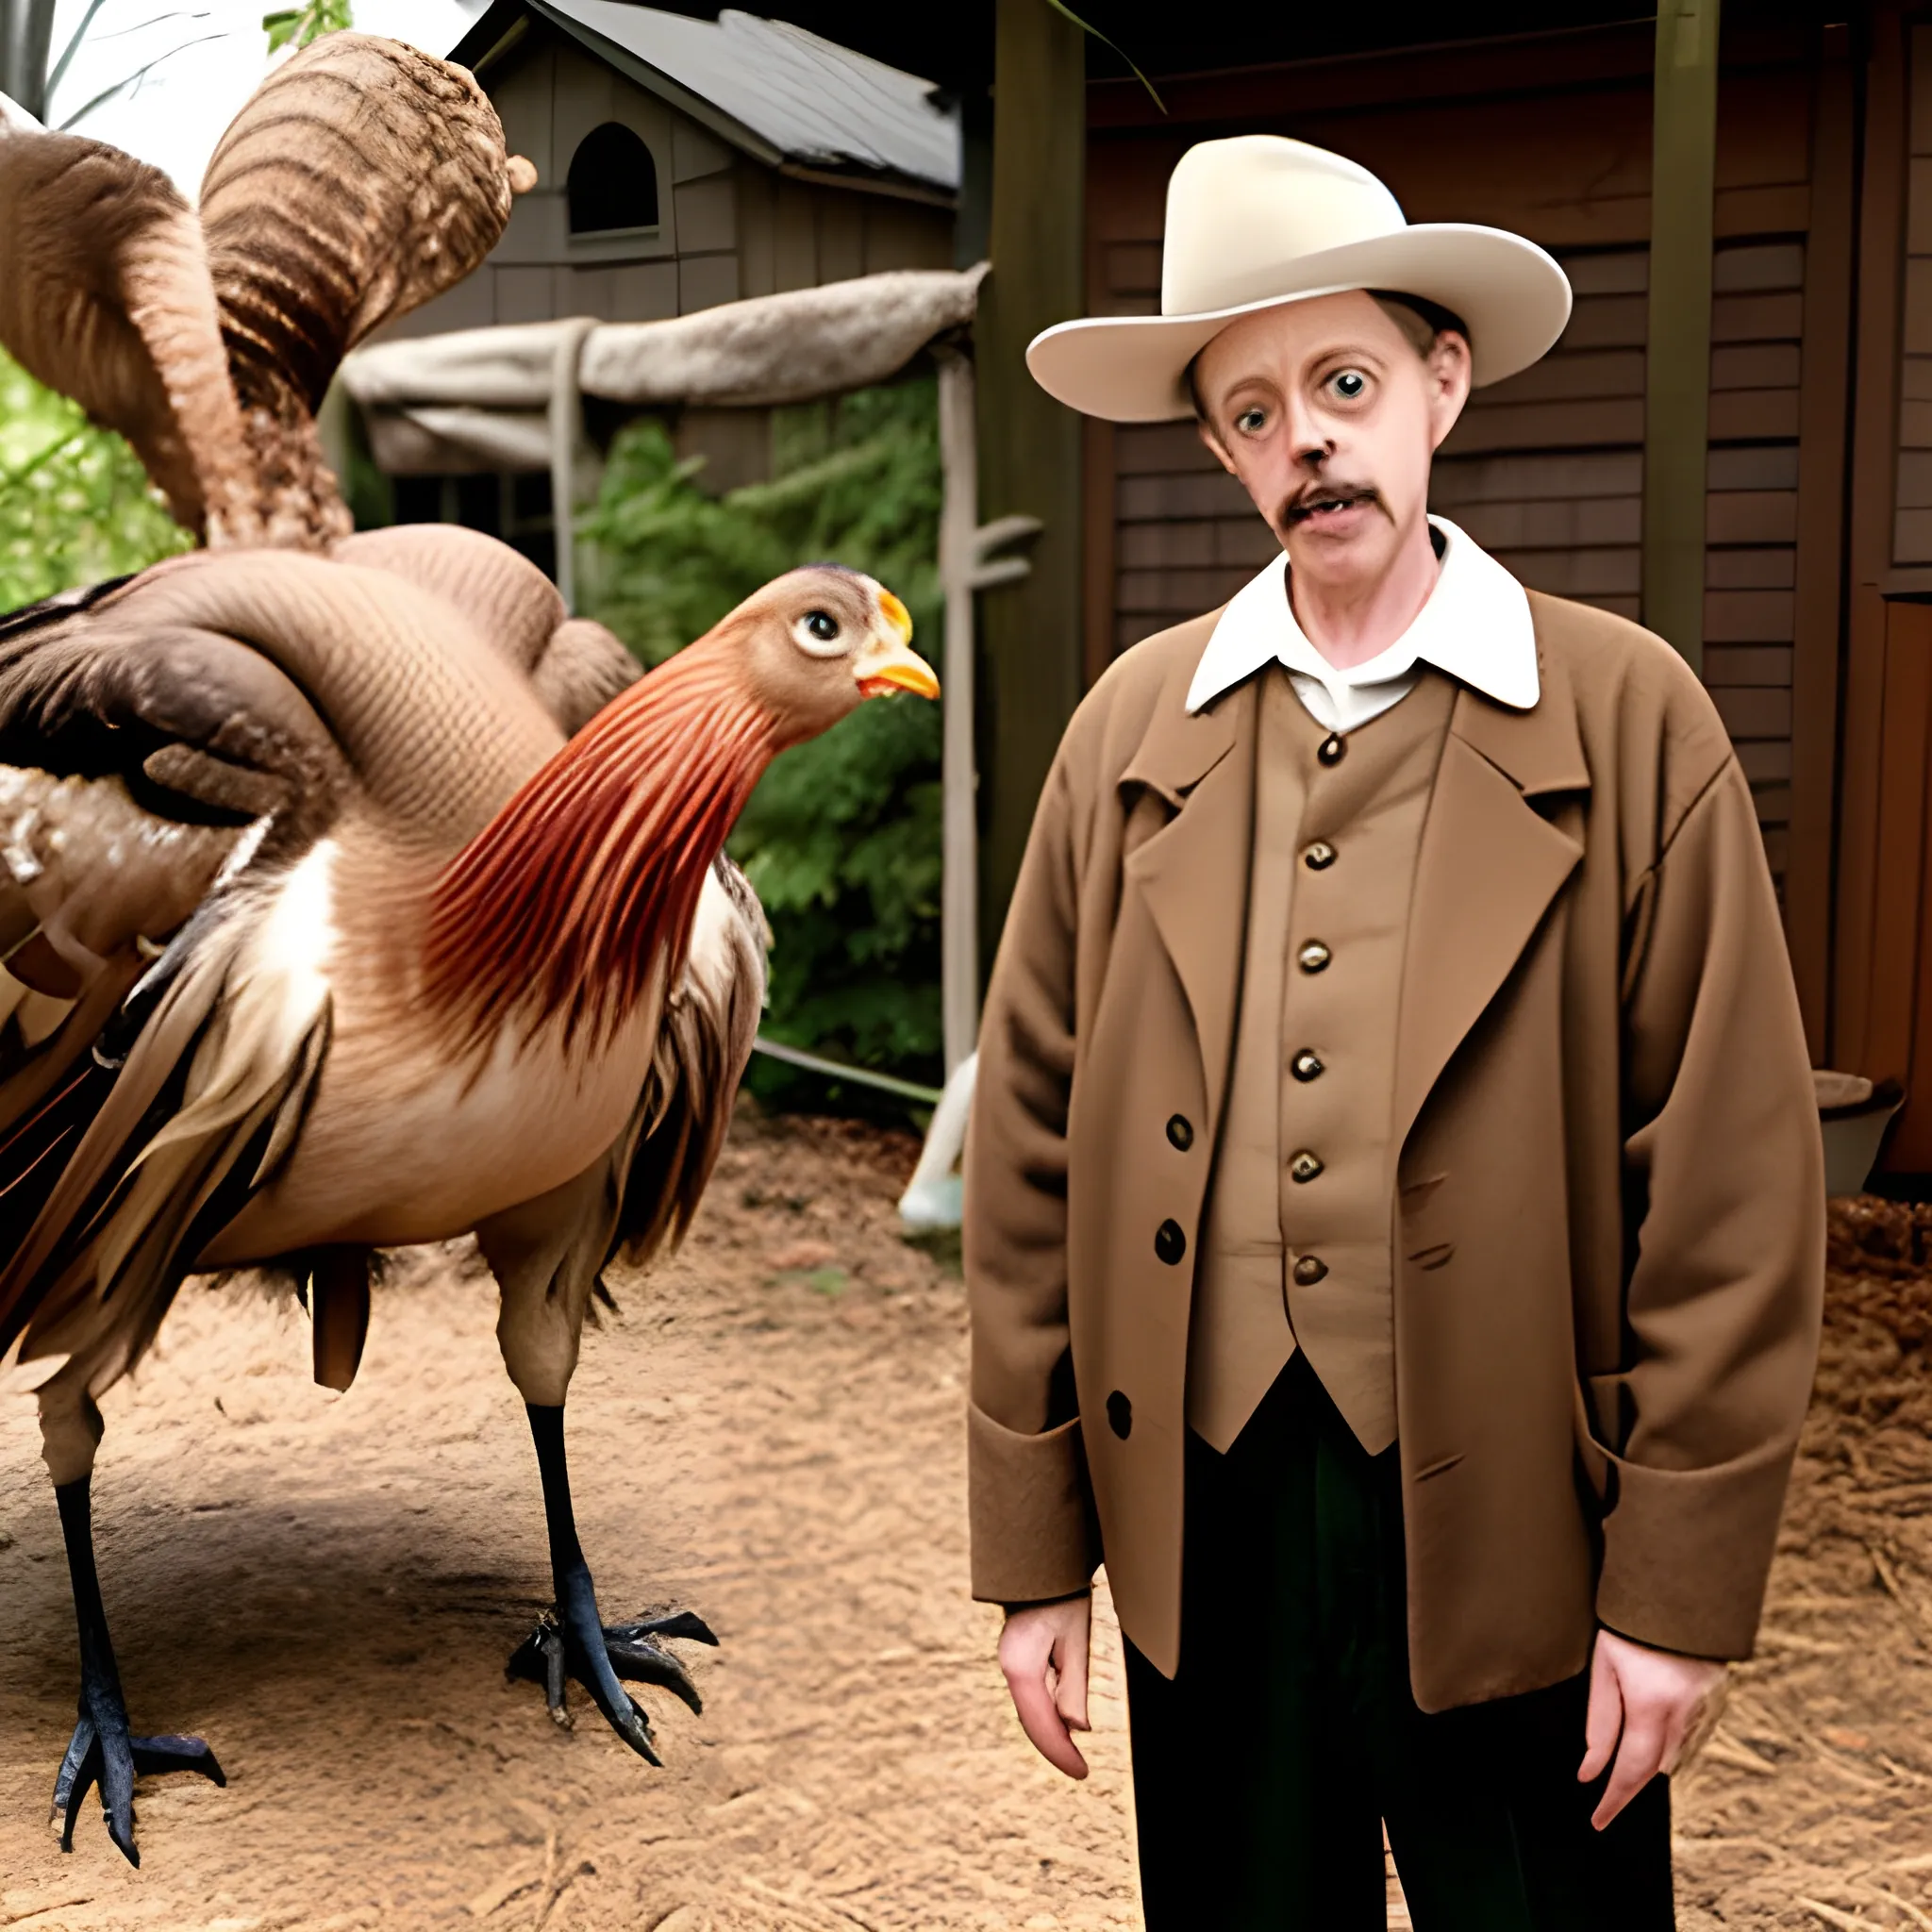 Steve Buscemi is standing next to a turkey, Steve Buscemi is wearing a pilgrim outfit